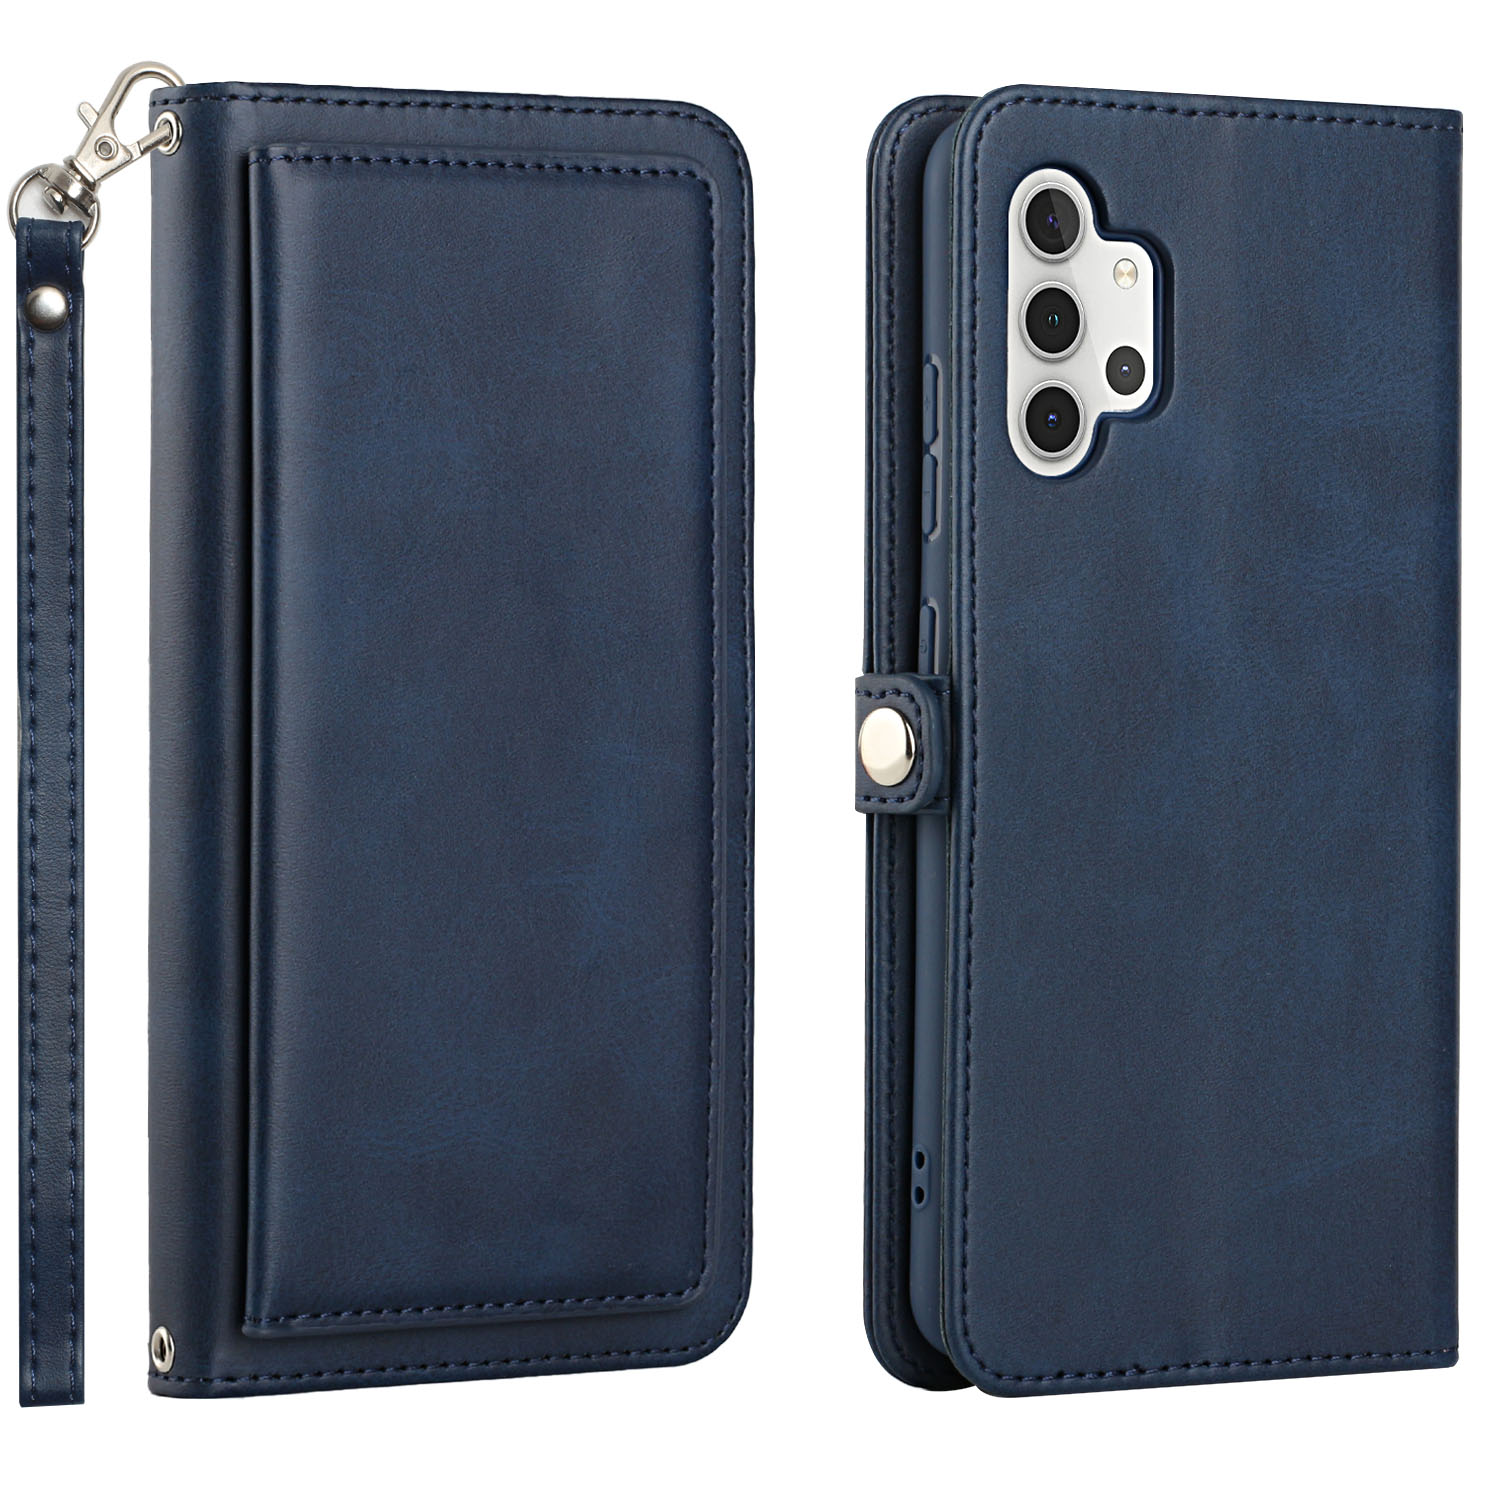 Premium PU Leather Folio WALLET Front Cover Case for Galaxy A32 4G (Blue)